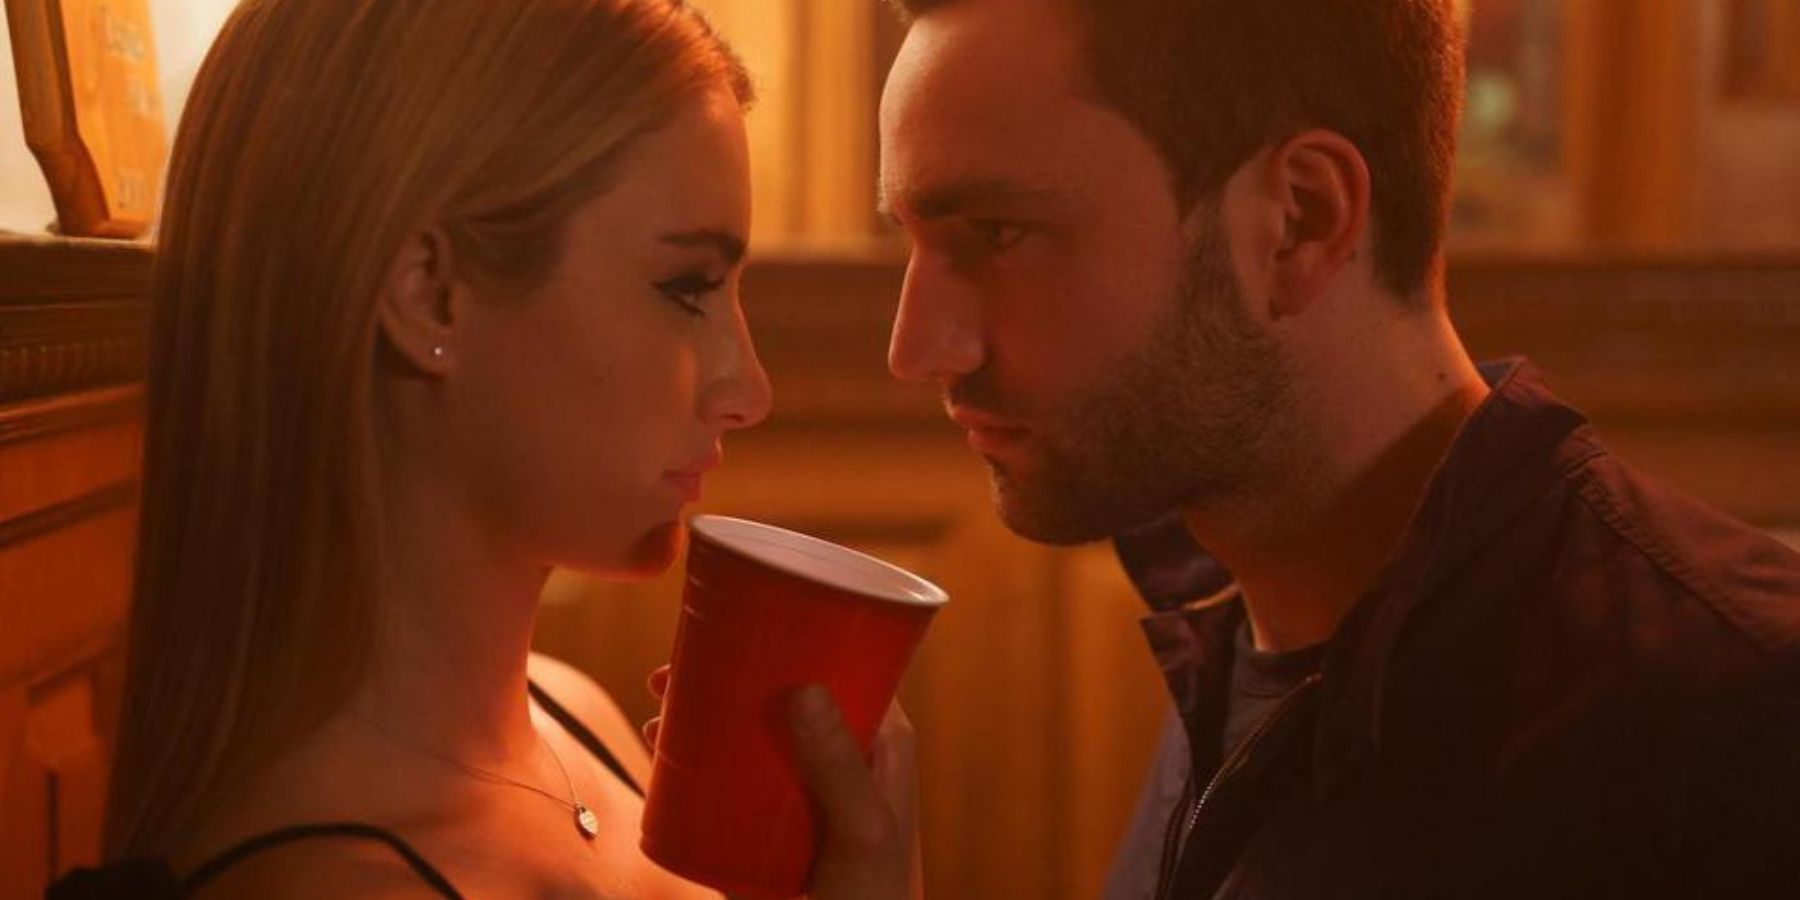 Lucy (Grace Van Patten) and Stephen (Jackson White) in Tell Me Lies